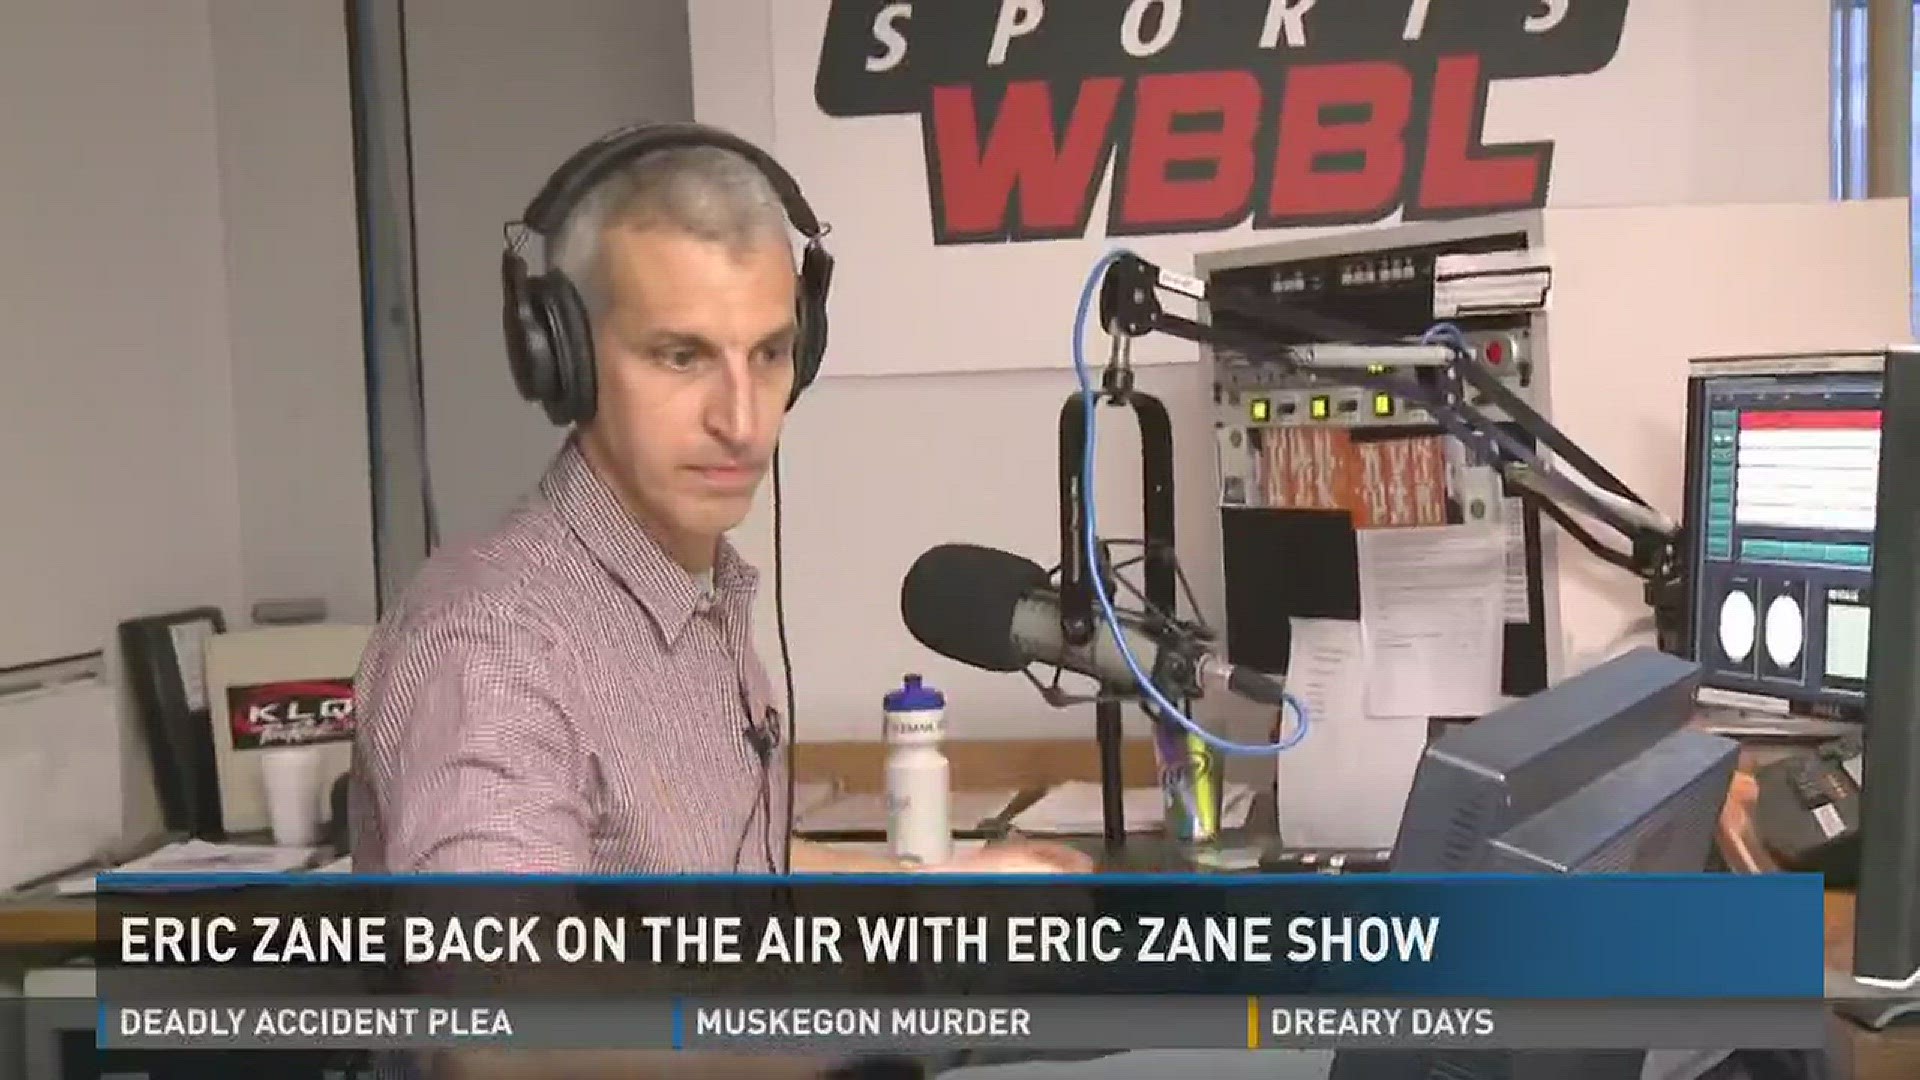 In his first show on WBBL FM, Eric Zane talked about the circumstances that led to his departure from the Free Beer & Hot Wings Morning Show.